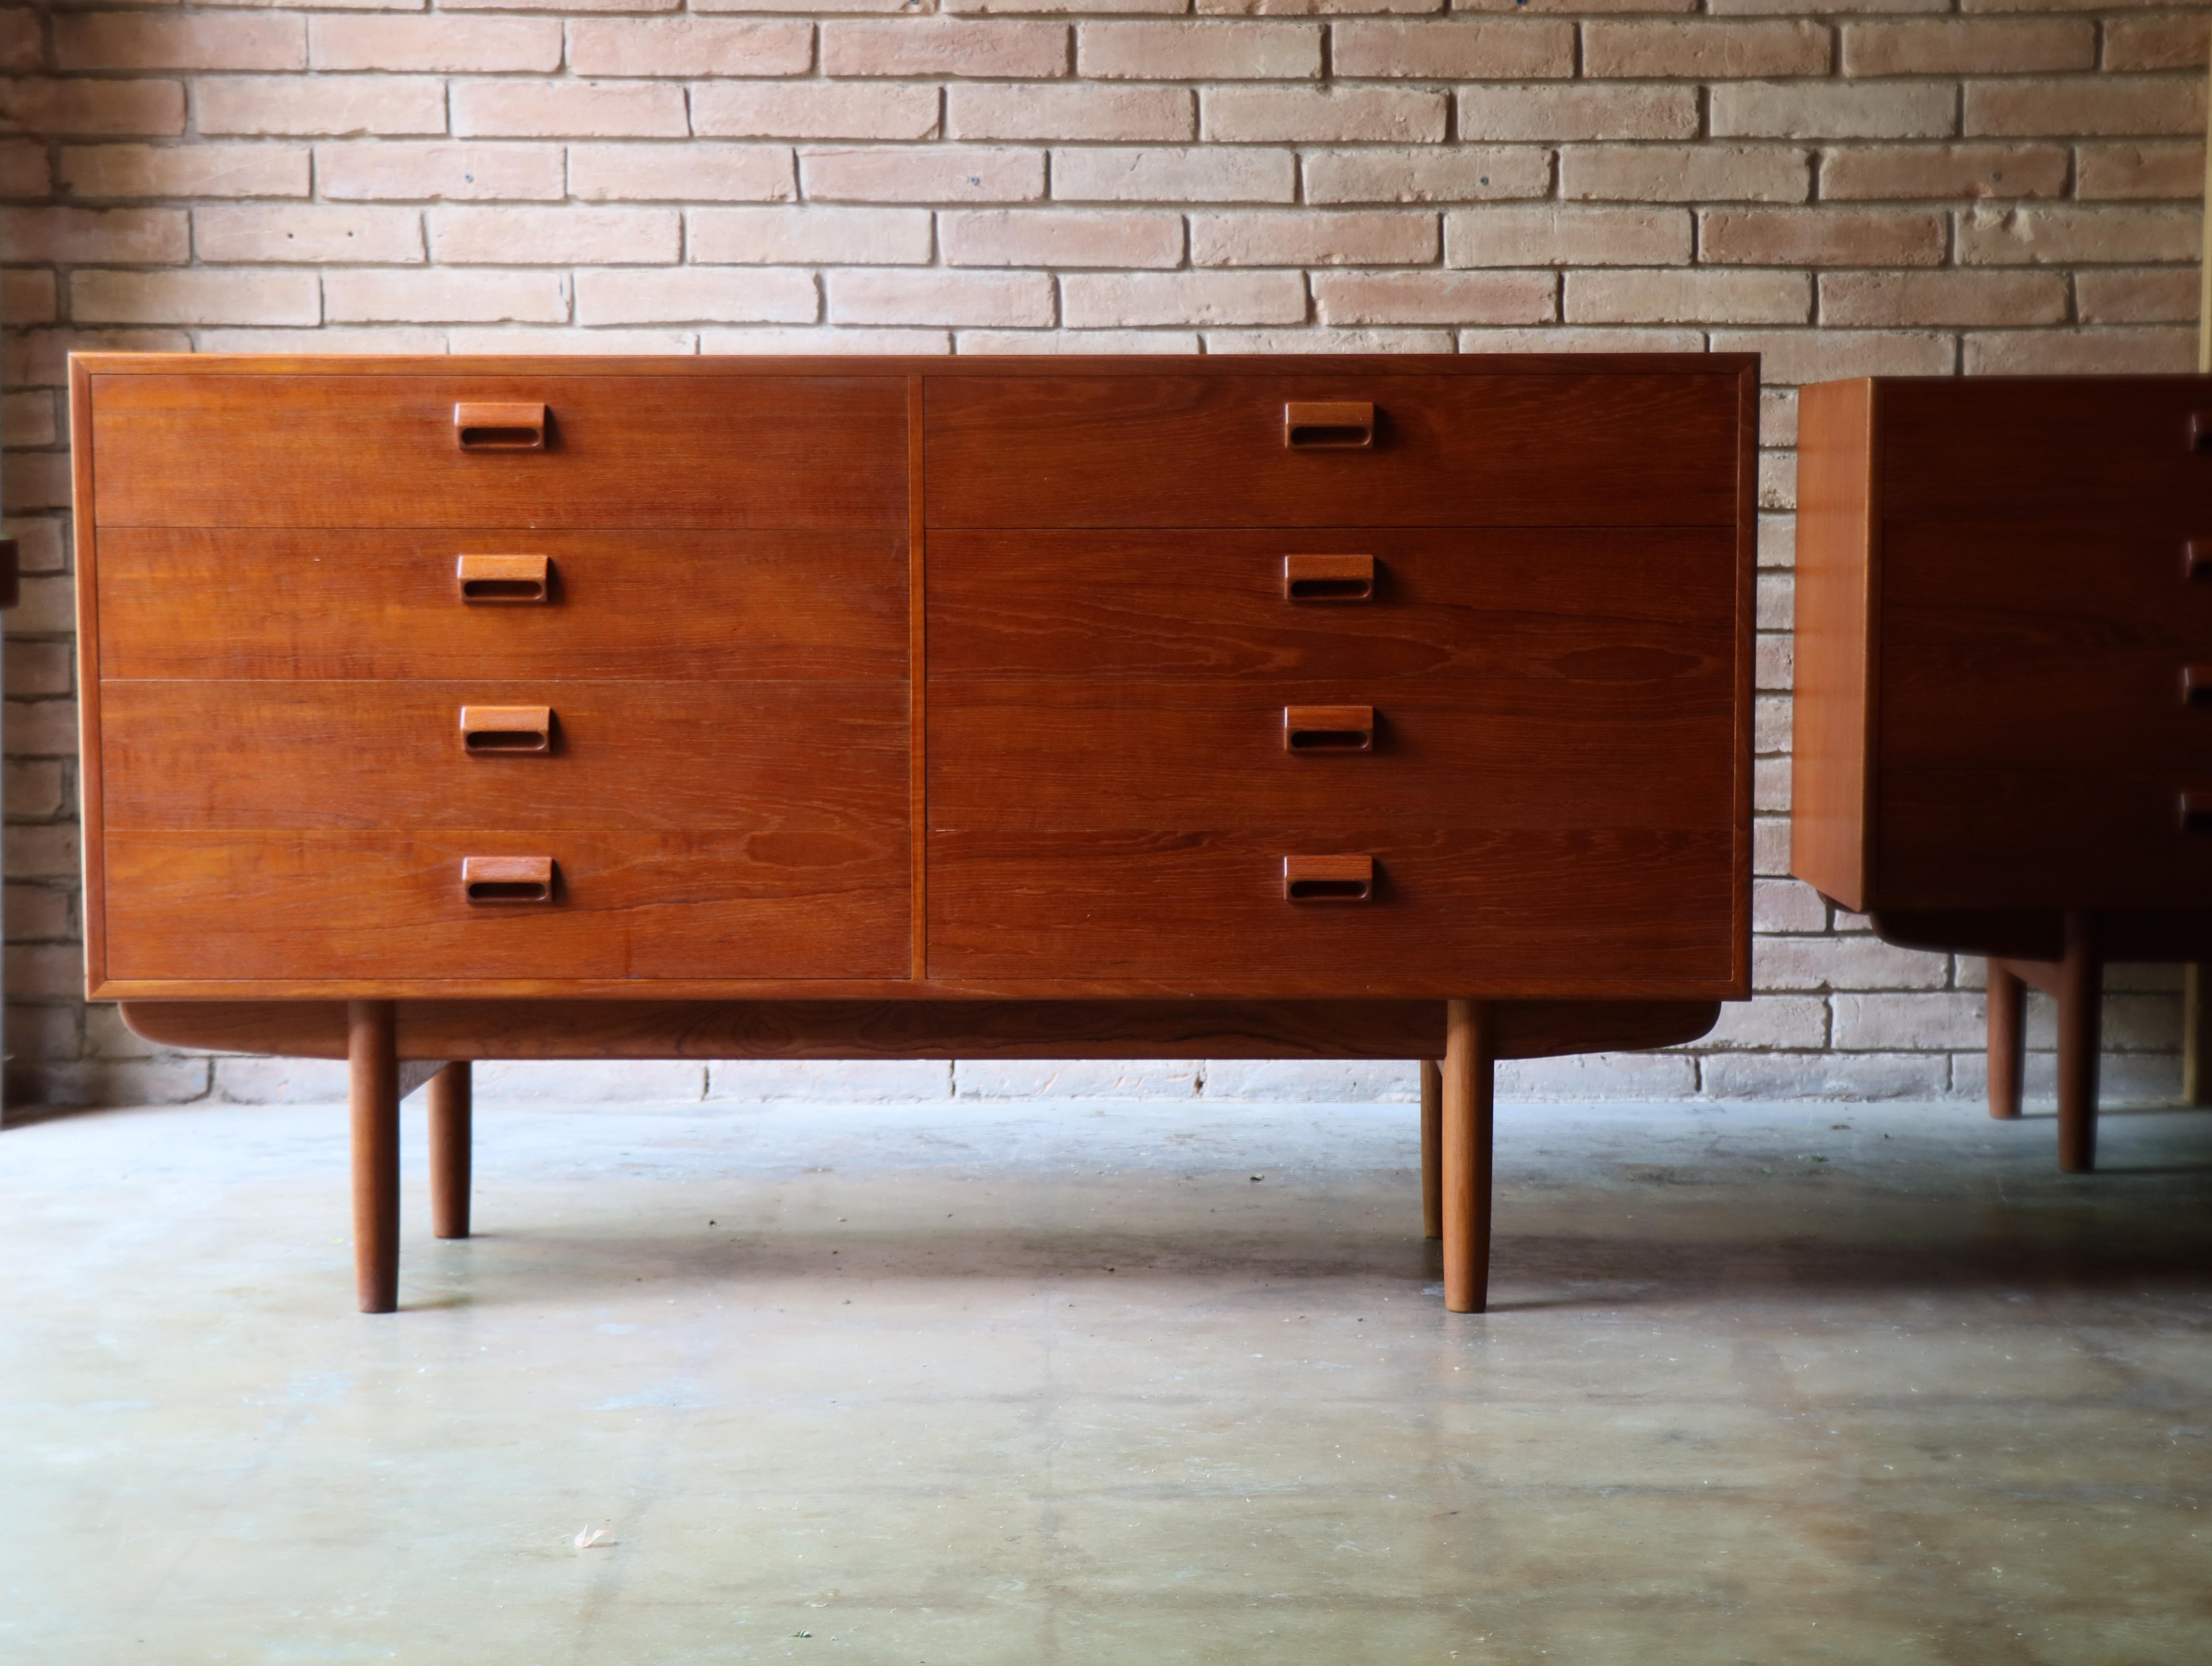 Hand-Crafted Pair of Danish Dressers by Borge Mogensen - Soborg Denmark, 1960s, Teak  For Sale